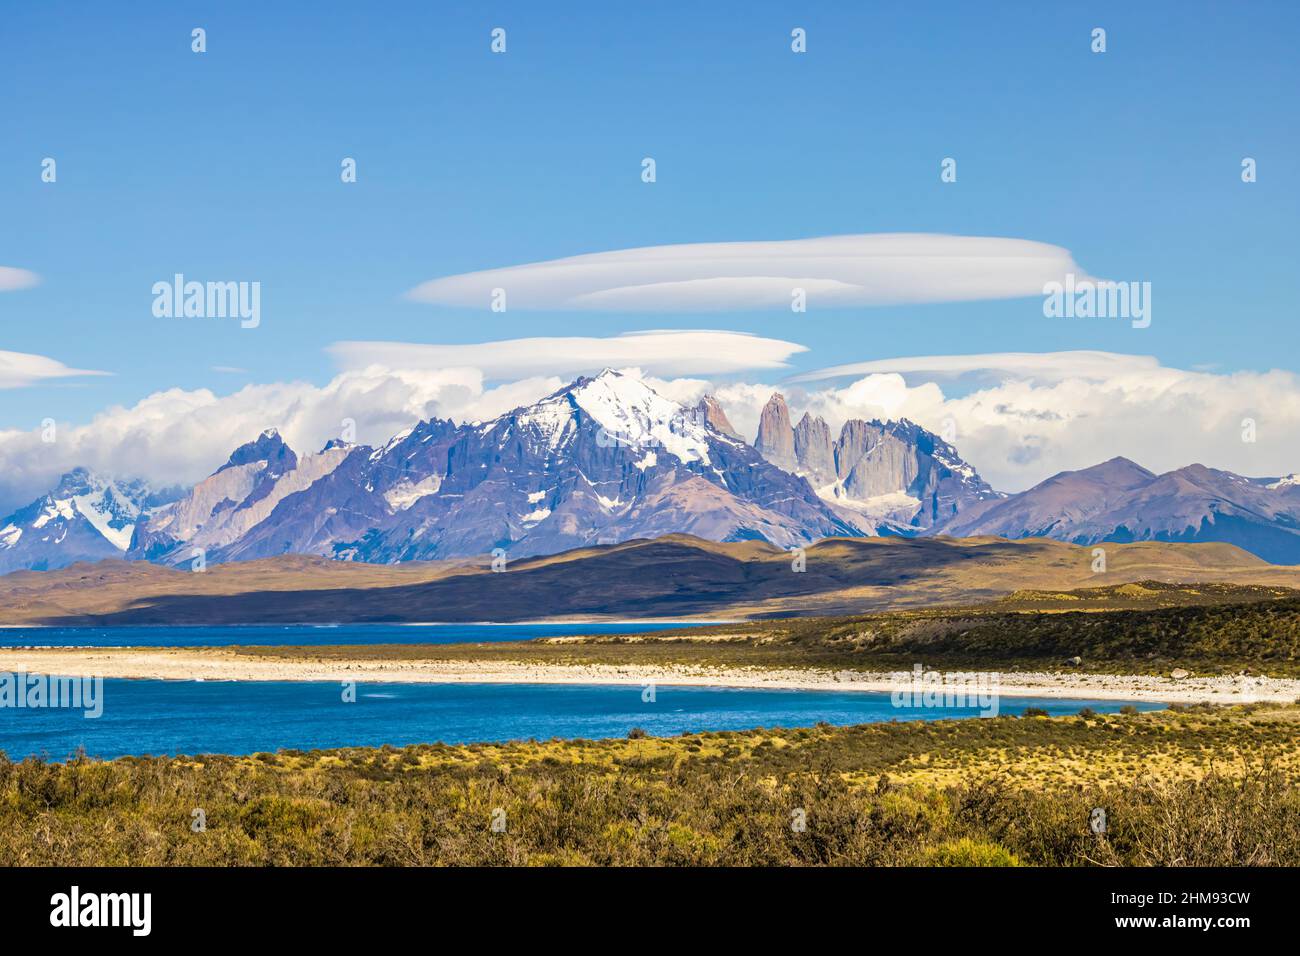 View to the jagged granite Torres del Paine mountain peaks in Torres del Paine National Park, Patagonia, southern Chile, viewed over Lake Sarmiento Stock Photo